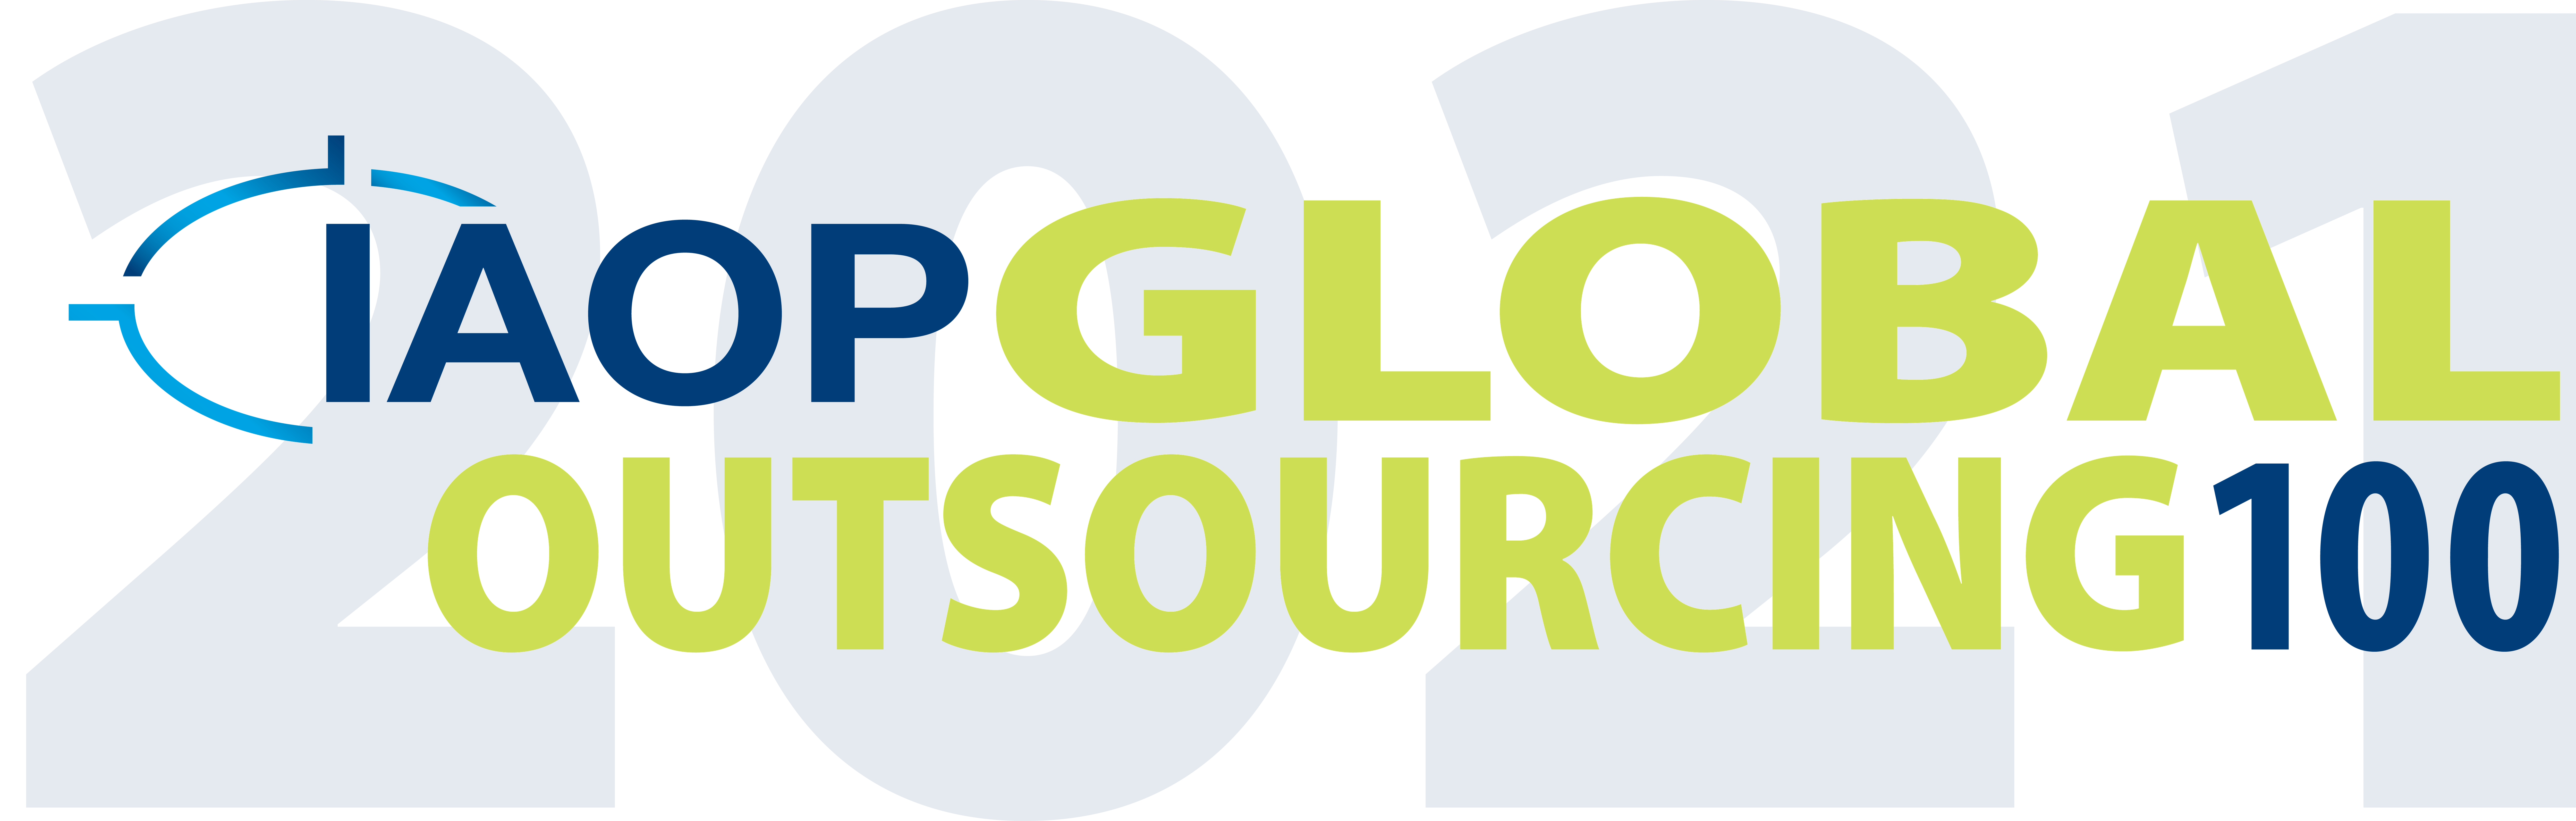 Qualfon receives leader recognition in IAOP’s Top 100 Outsourcing list